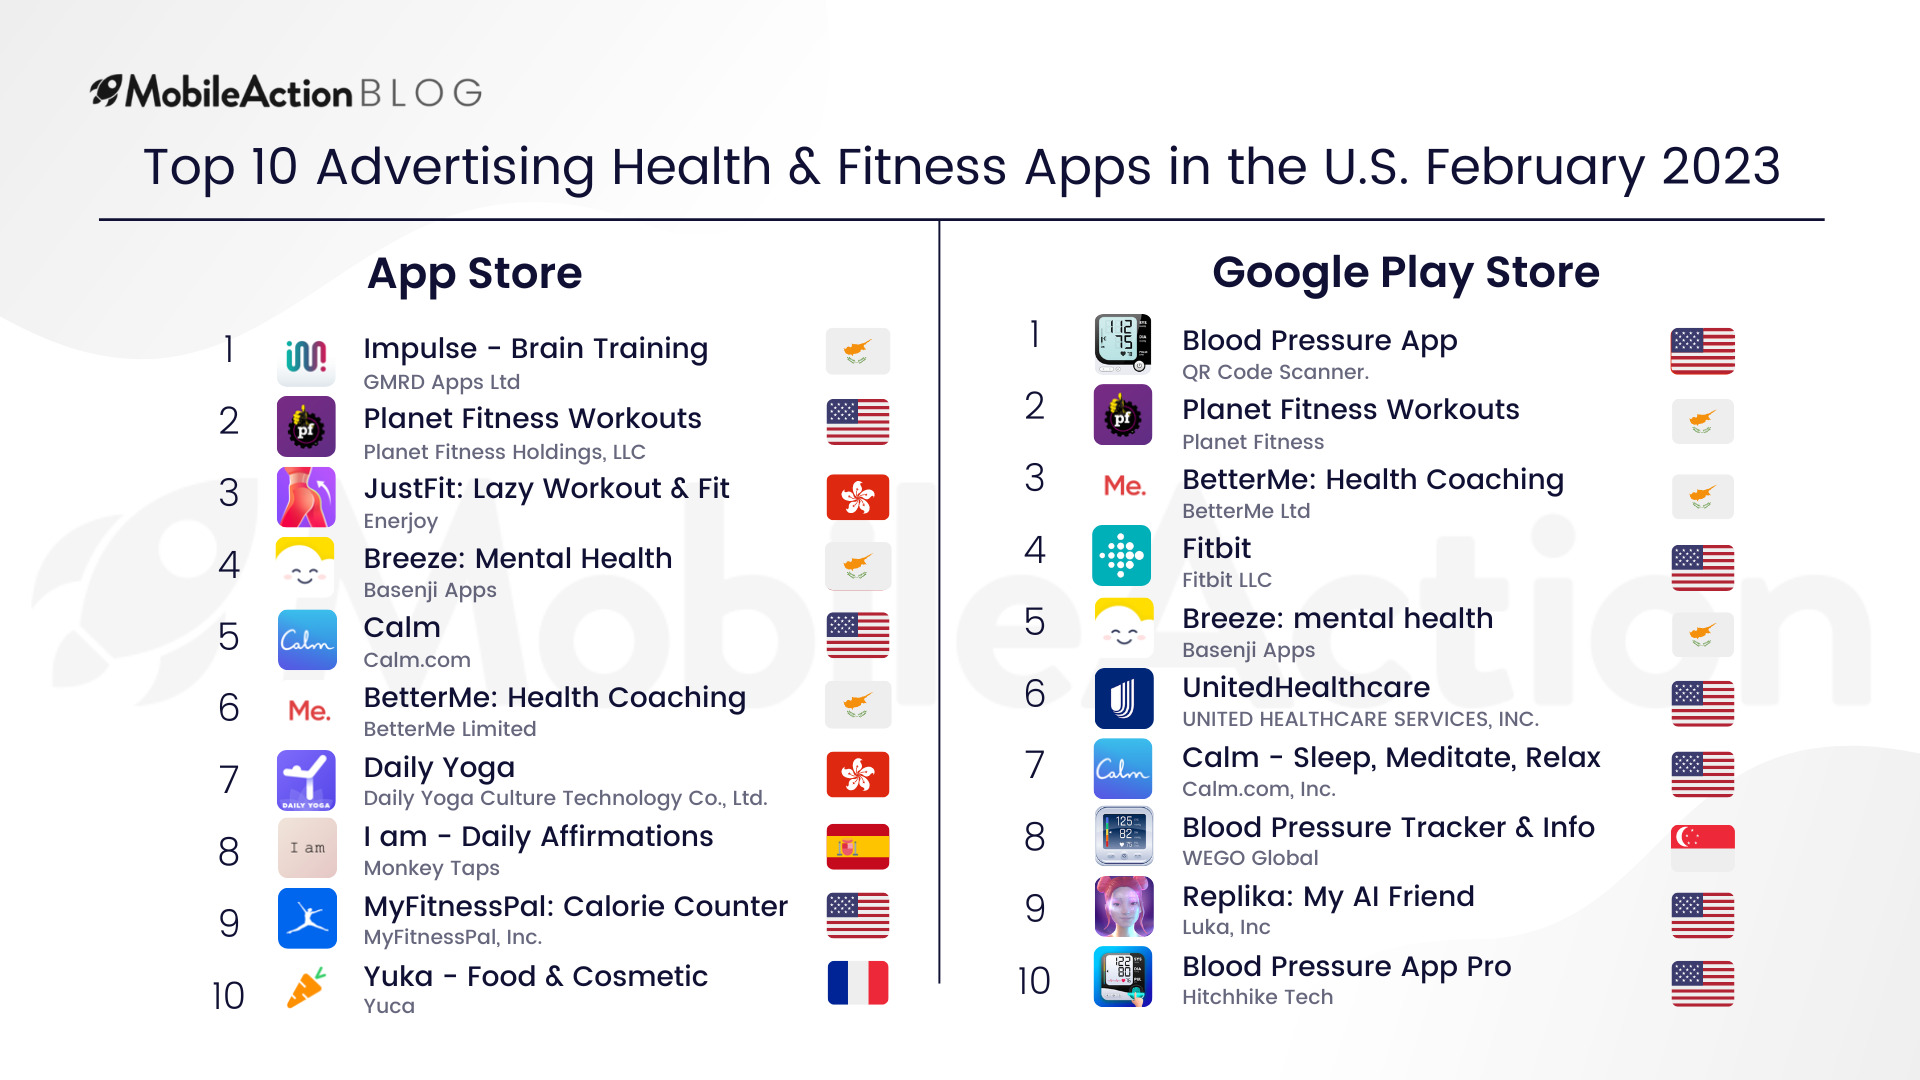 Top 10 Advertising Health & Fitness Apps in the U.S. February 2023